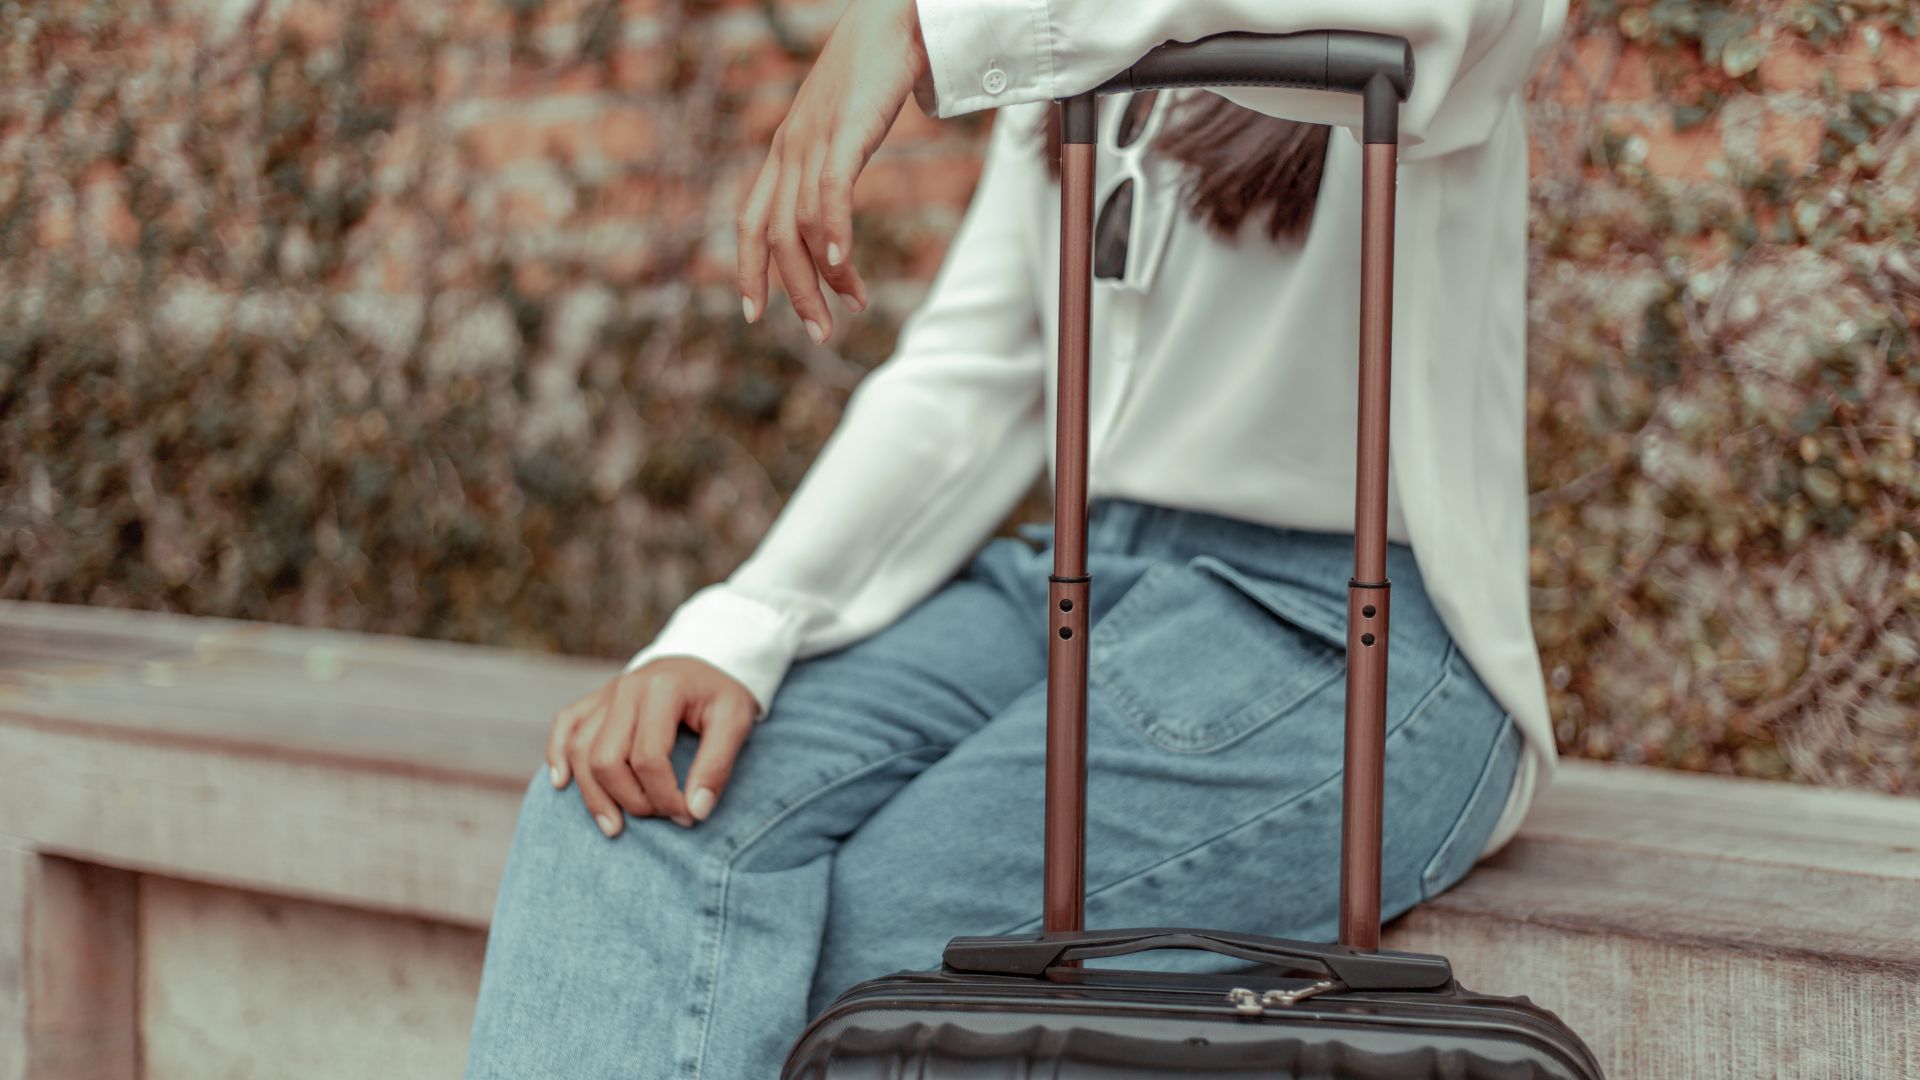 Seated female wearing a white shirt and blue jeans leaning on a suitcase handle